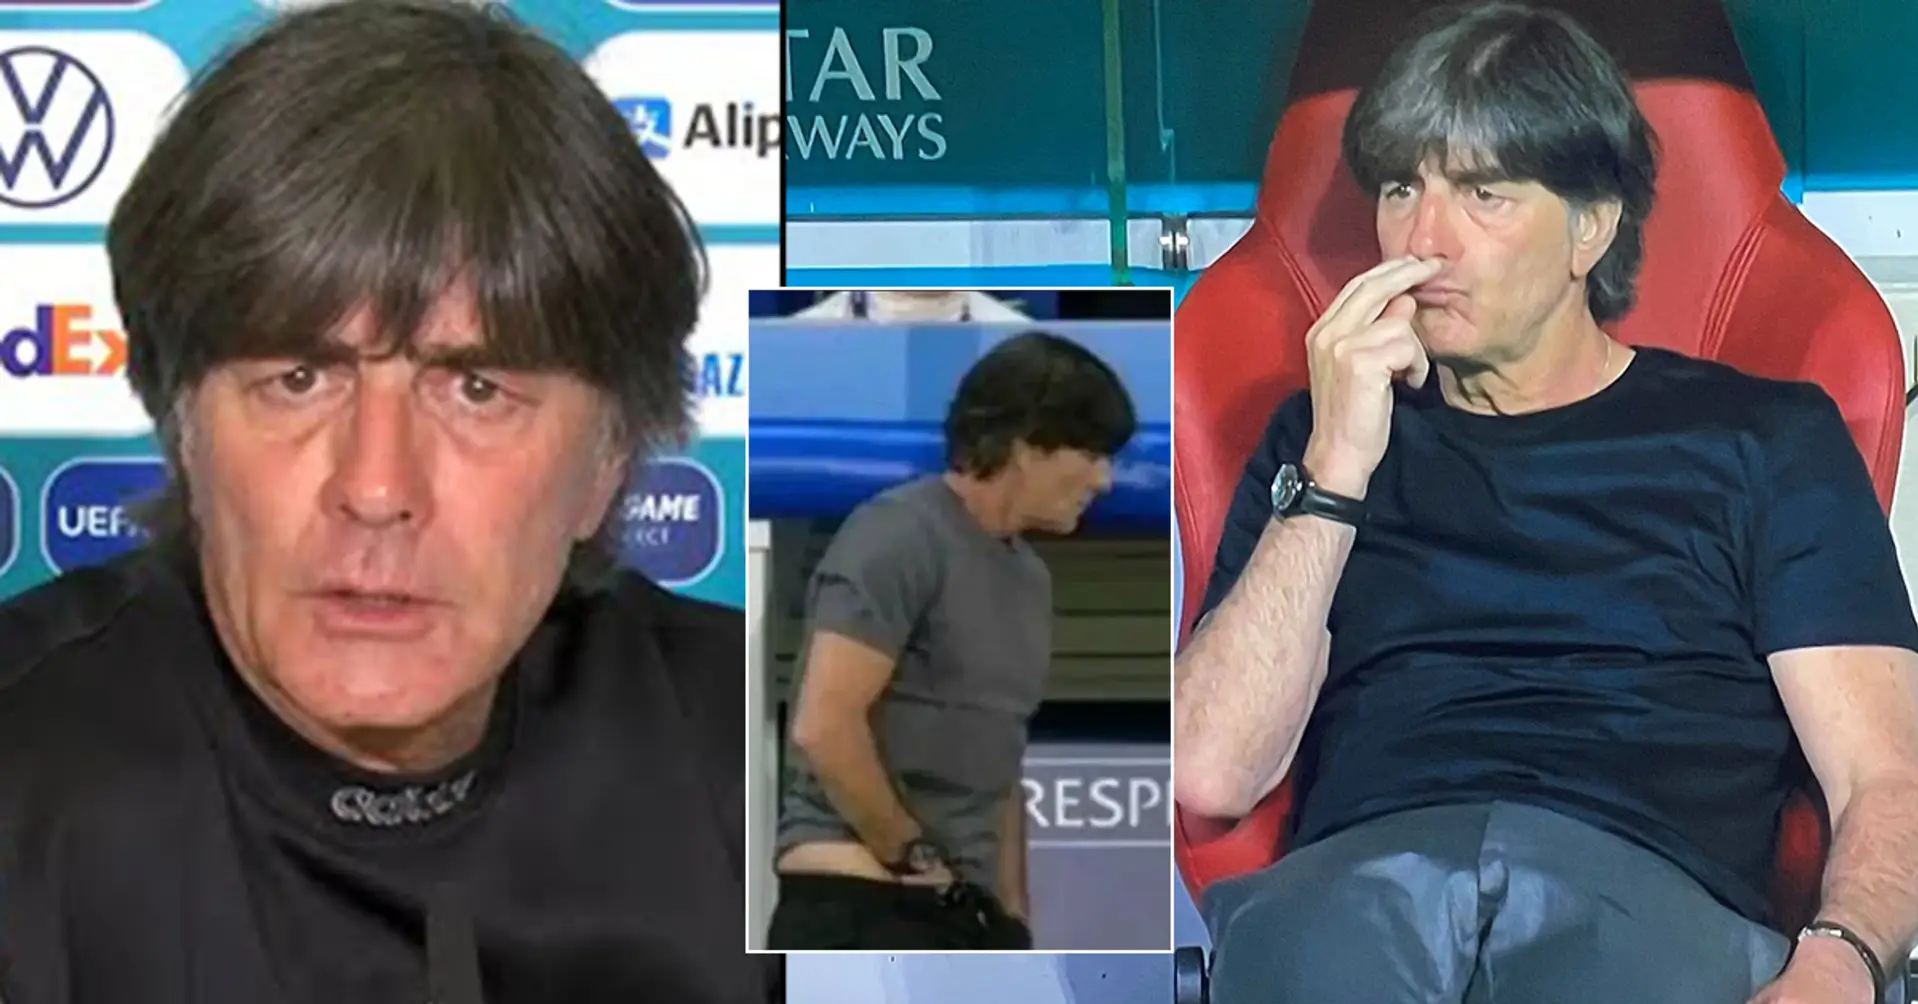 ‘I saw pictures’. Joachim Low’s explanation for his weird behaviour on touchline and sniffing fingers